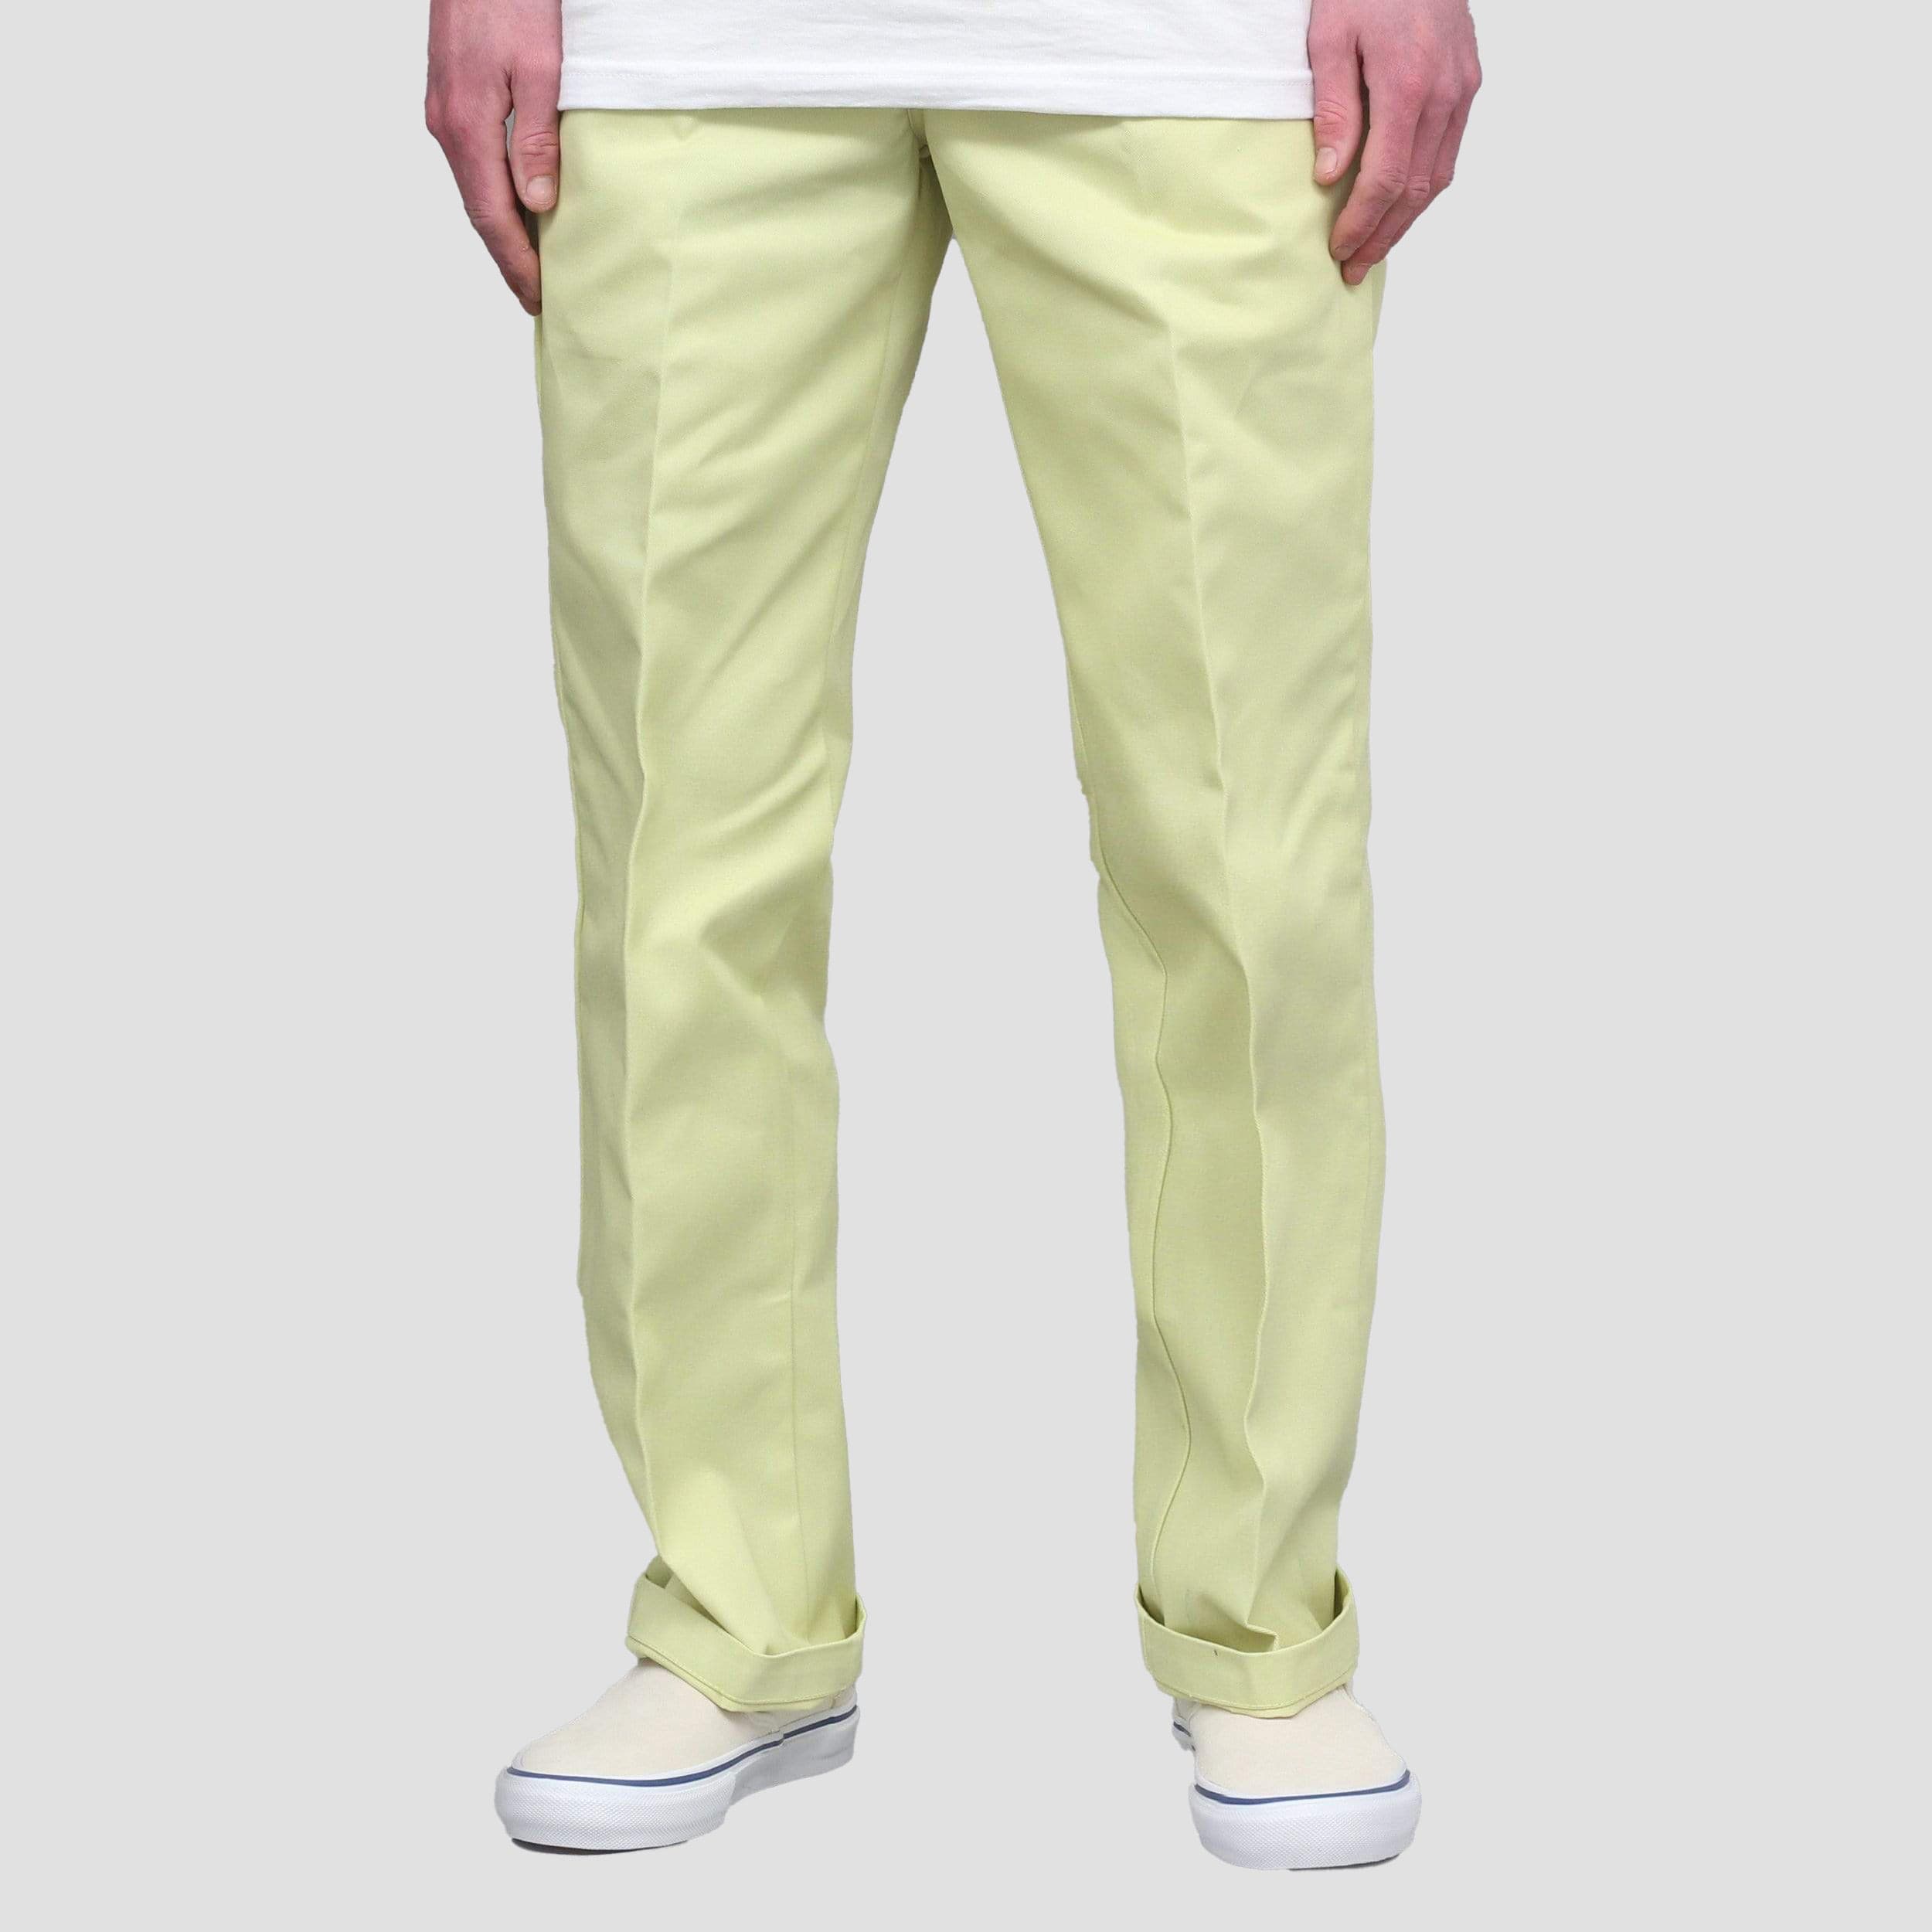 Permanent Crease Trousers by Boysens by Boysens  Look Again